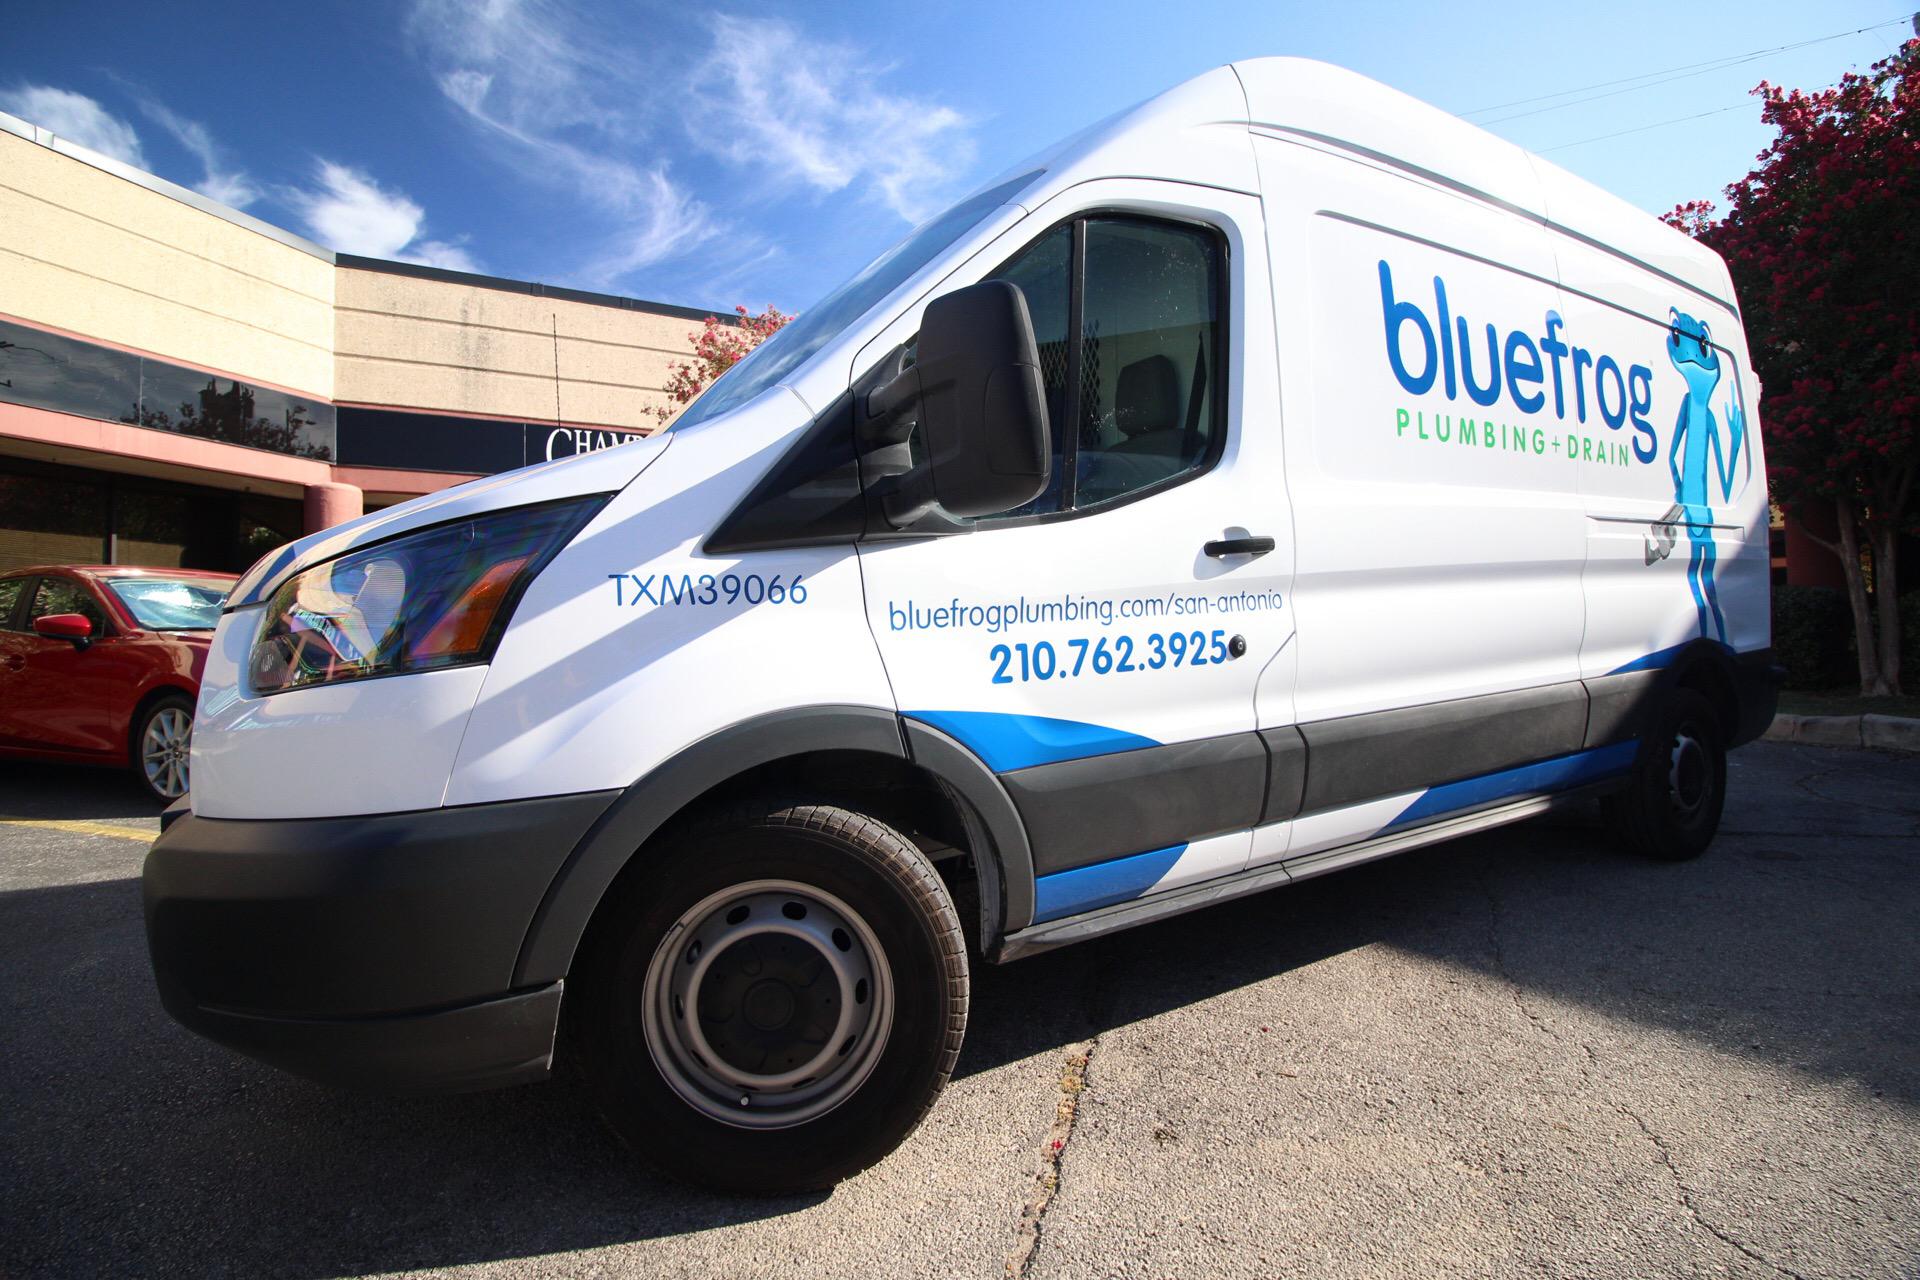 A bluefrog Plumbing + Drian truck ready to be your emergency plumber in San Antonio.